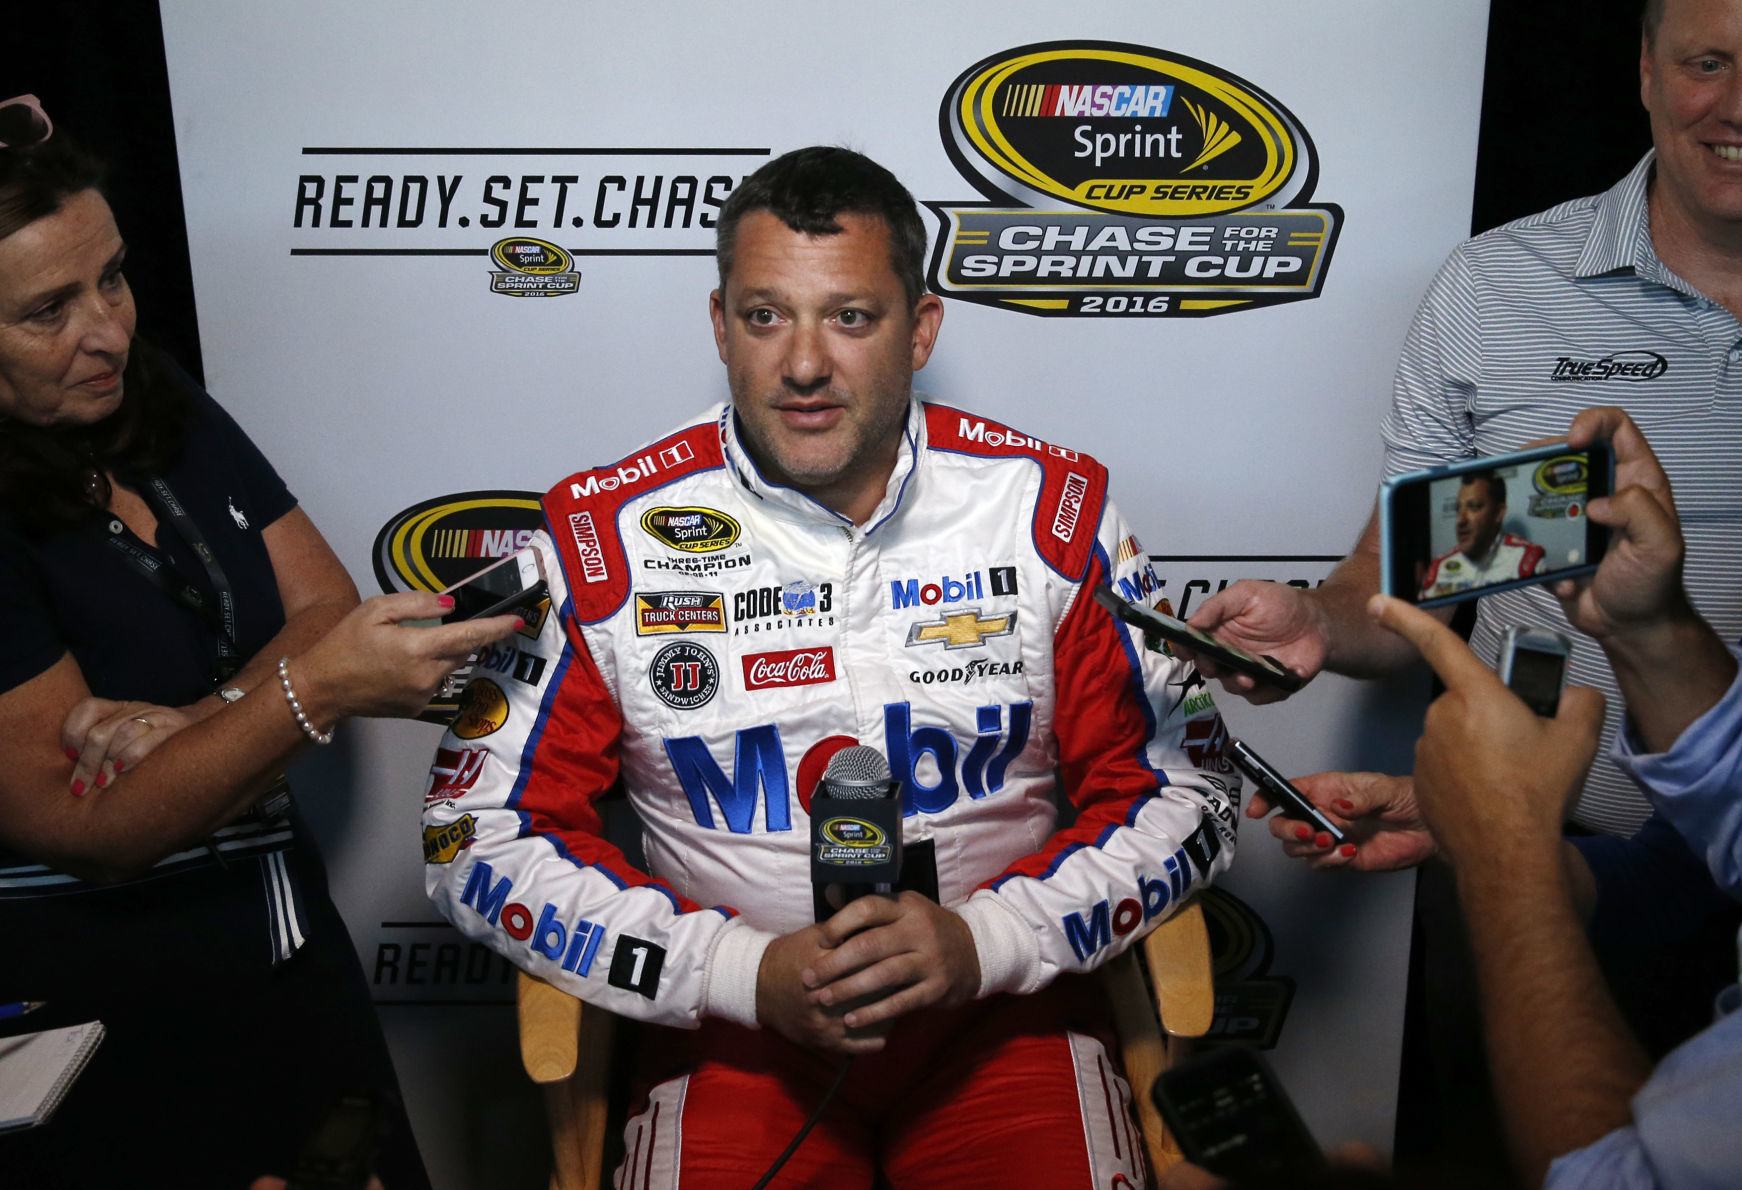 Racing legend Tony Stewart to appear at Ollies Bargain Outlet grand opening in Merrillville